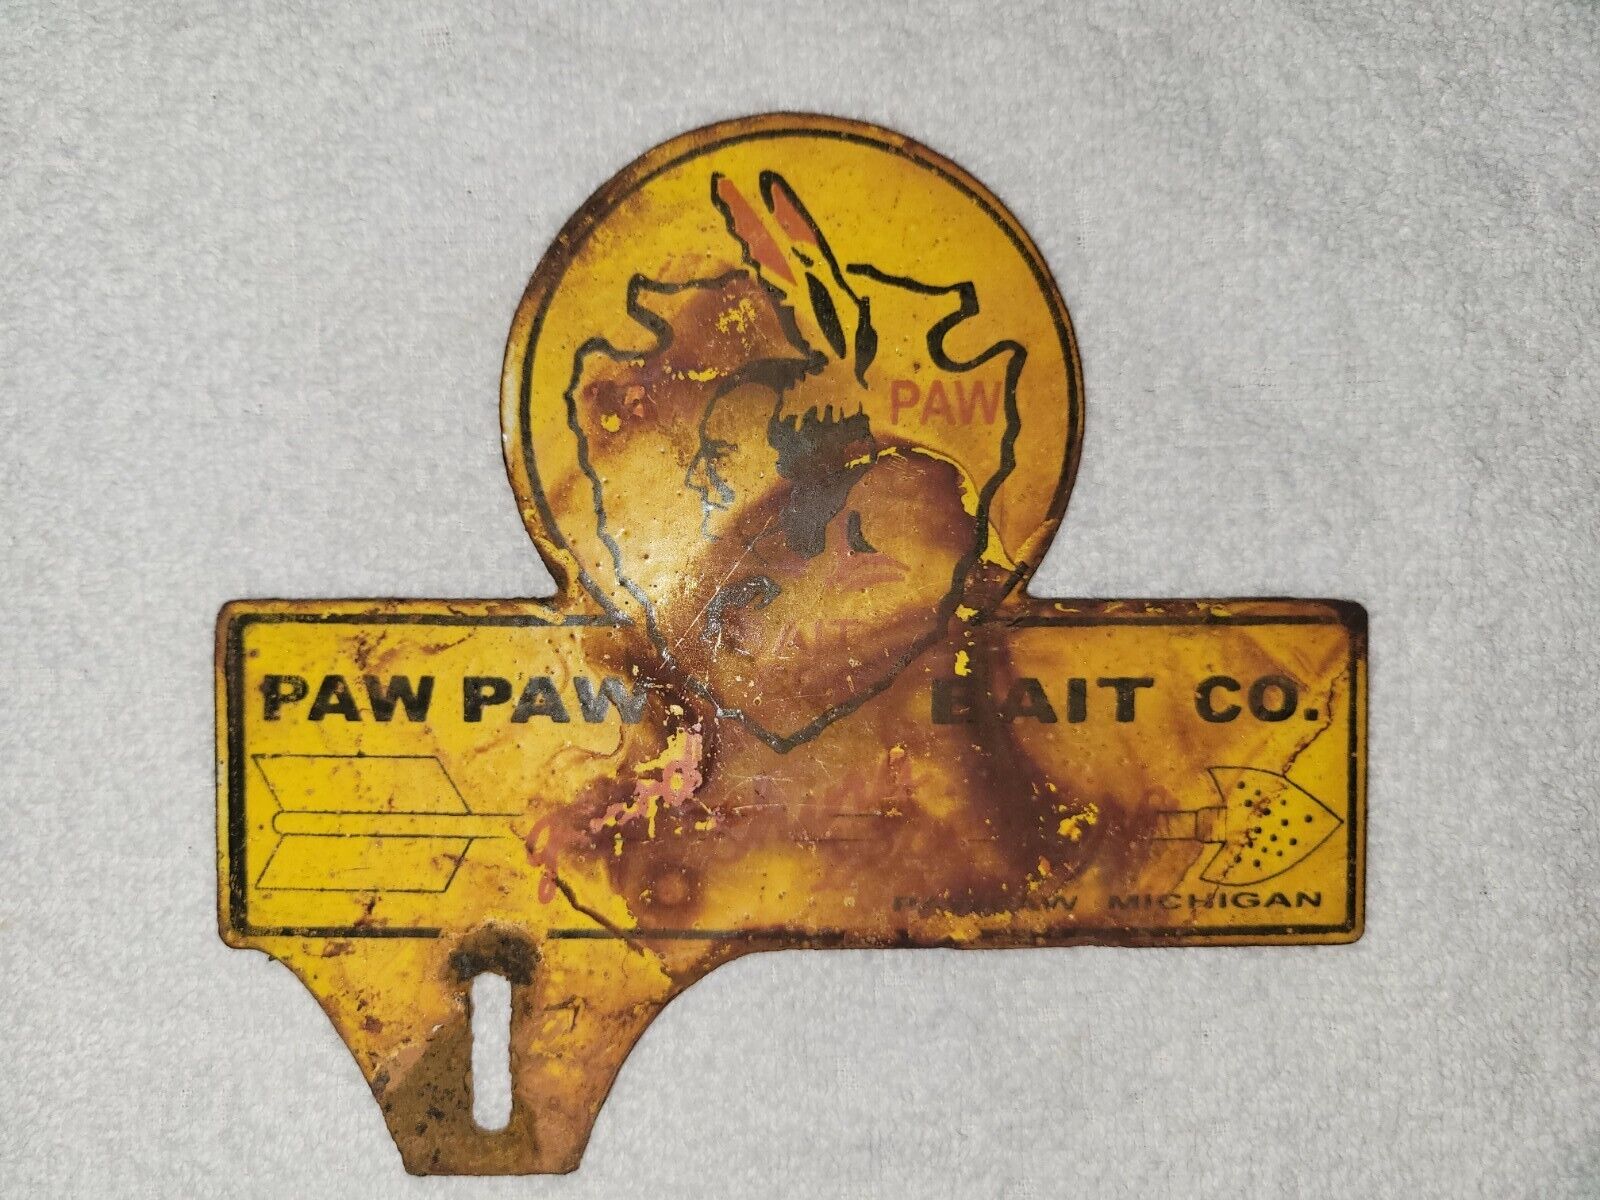 Vintage Paw Paw Bait Co Porcelain Sign Topper Good Fishing Begins Here MICHIGAN